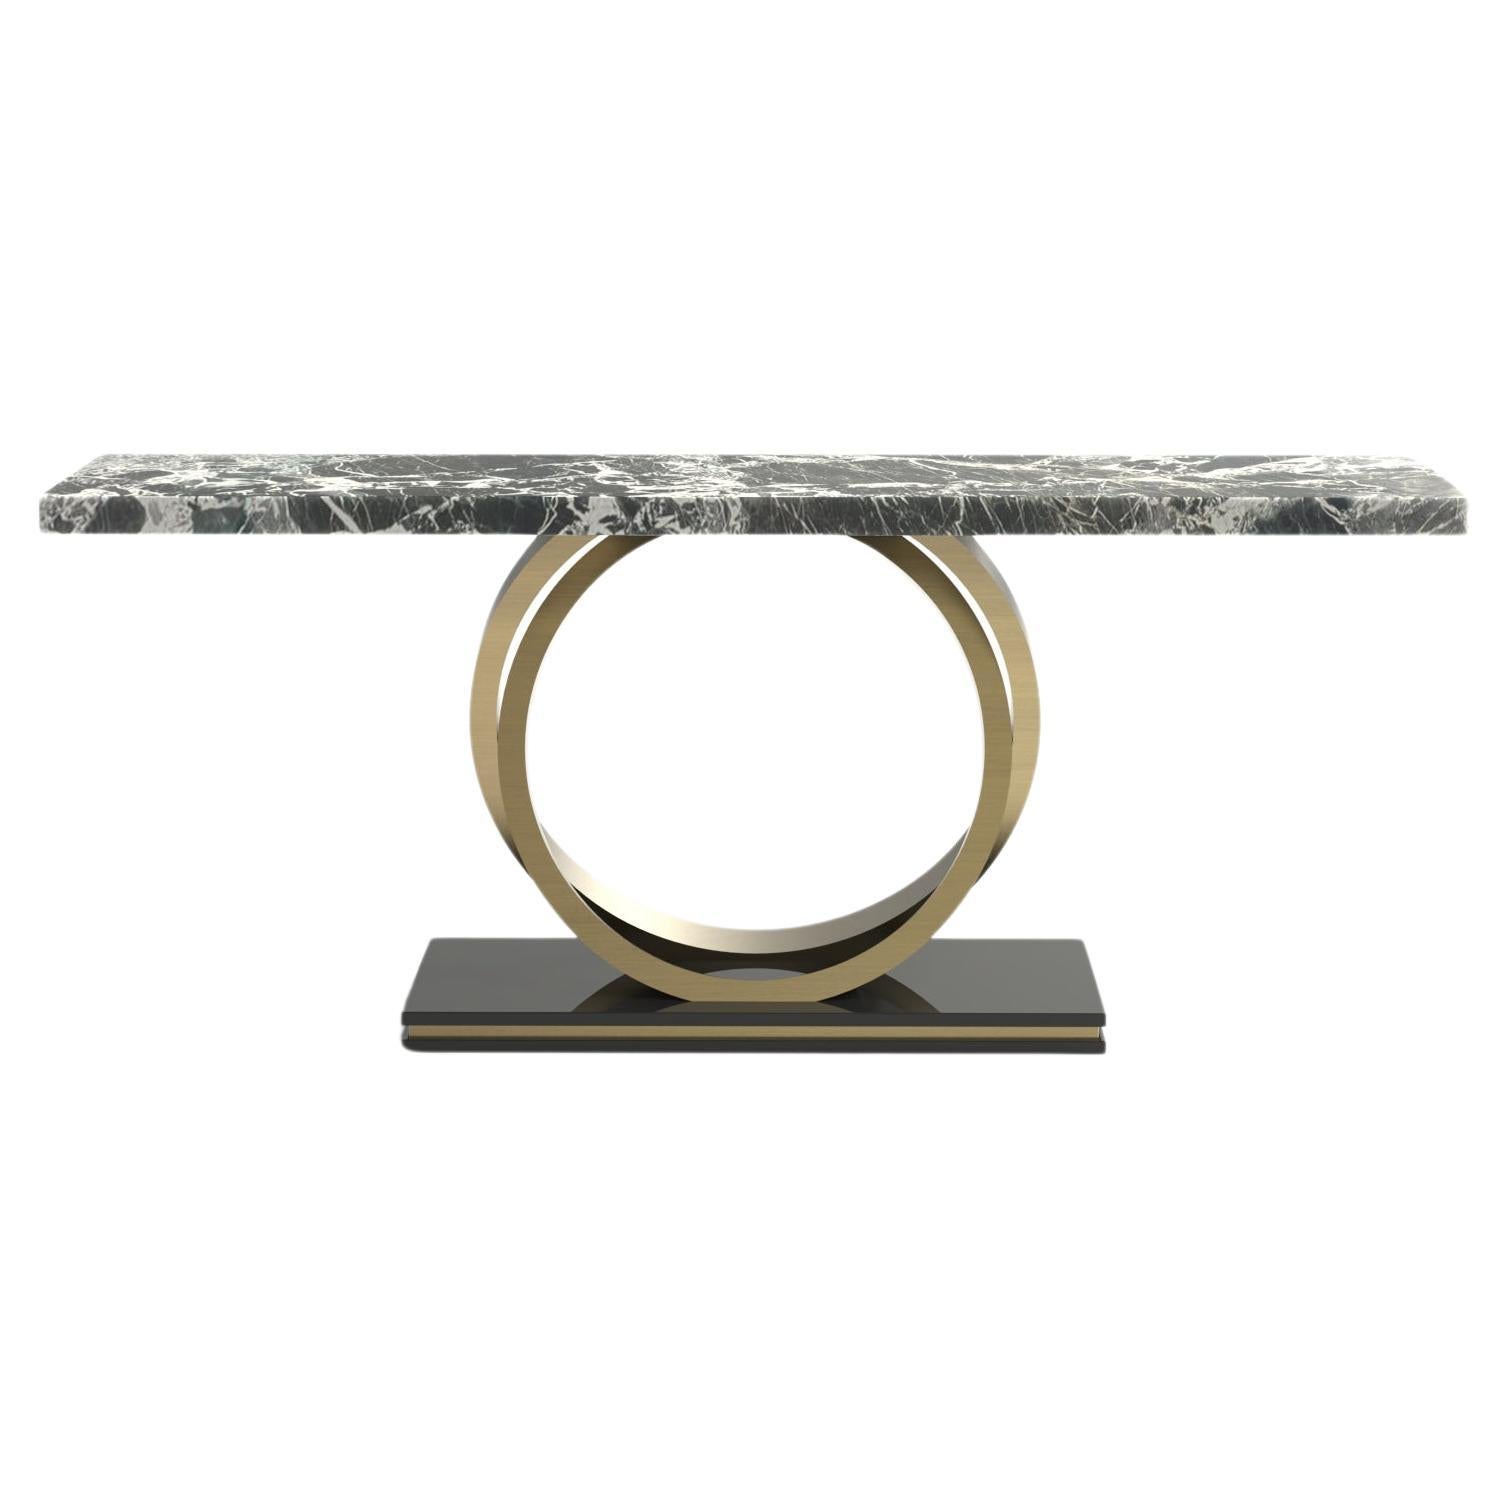 Art Deco Armilar Console Table, Antique Marble, Handmade Portugal by Greenapple